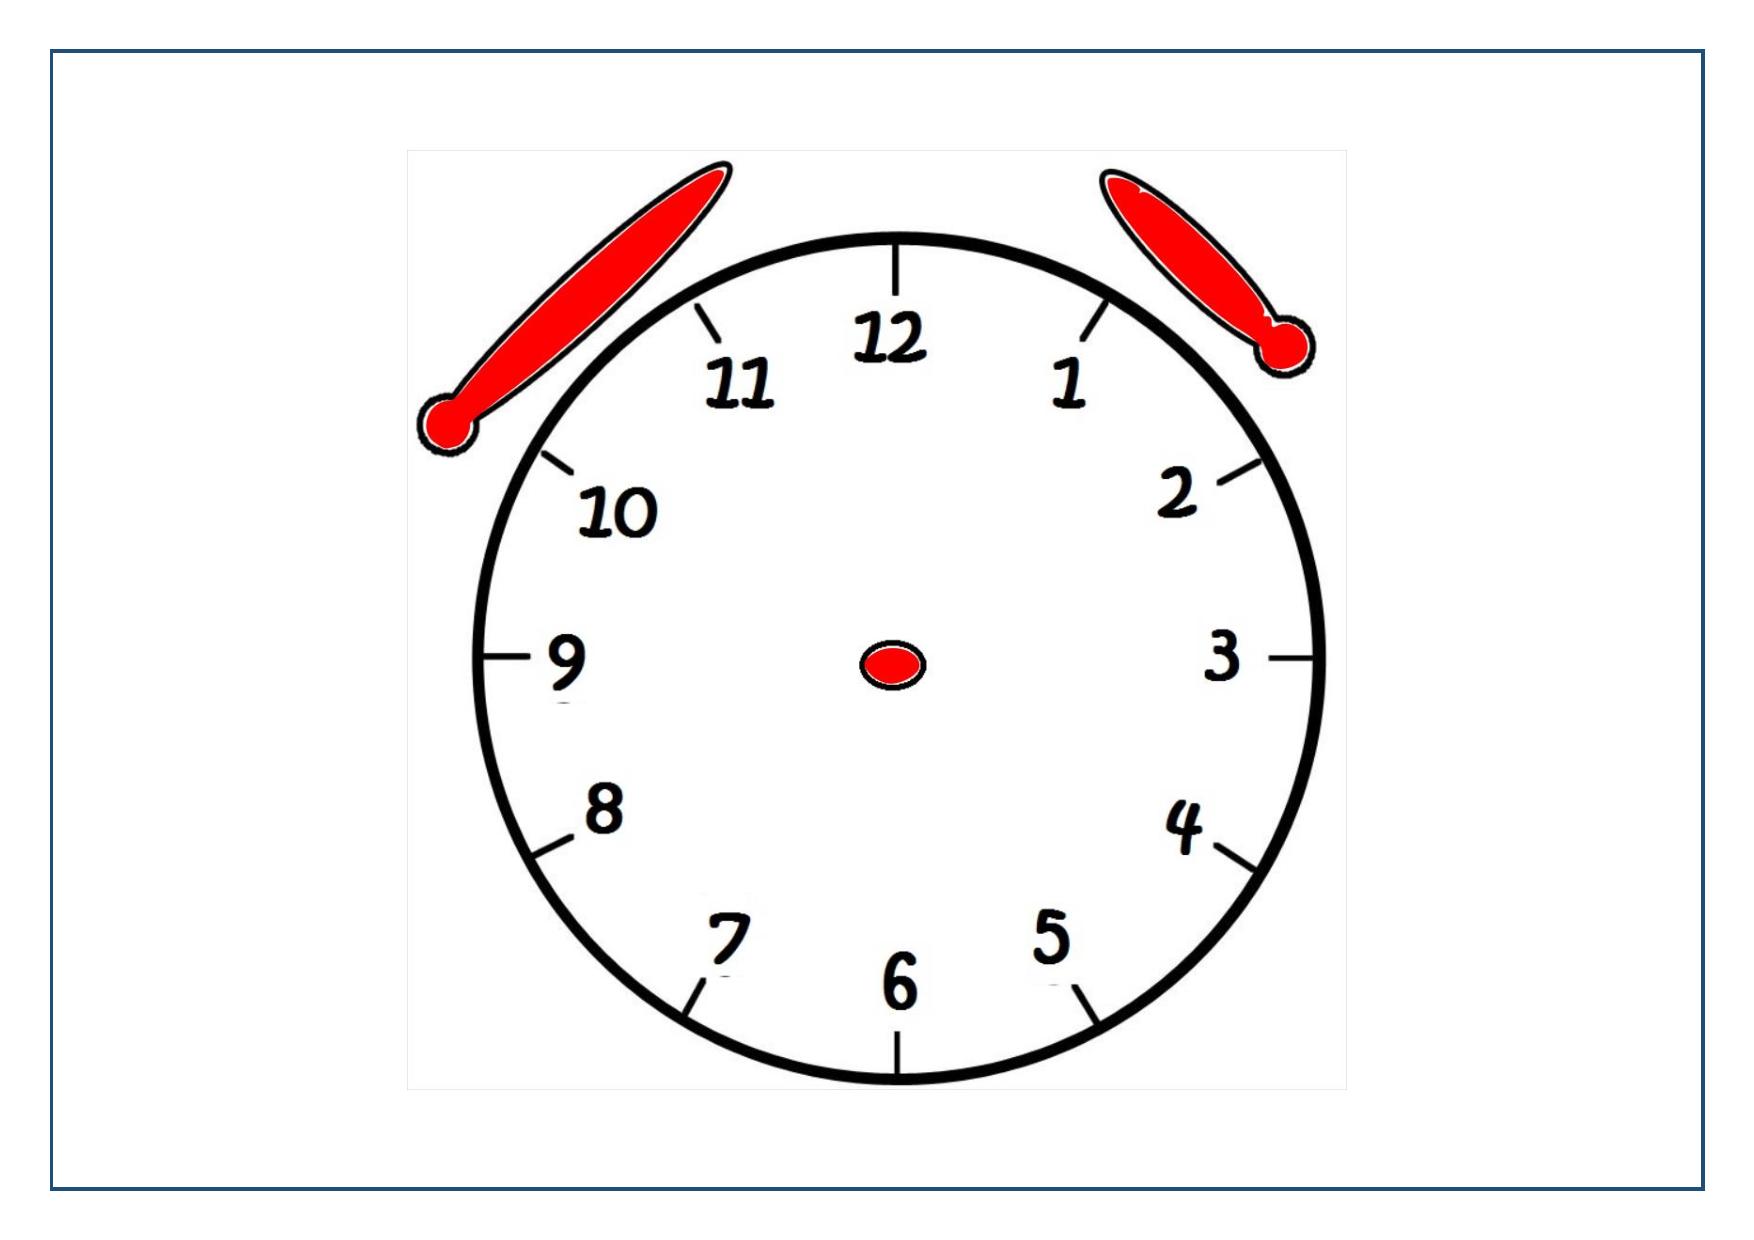 Die Zeit/ the time



Practice telling the time in German! Move the hands and let your students read the time. Say the hour and then the minutes. Say the word ‘Uhr’ (time) between… Continue